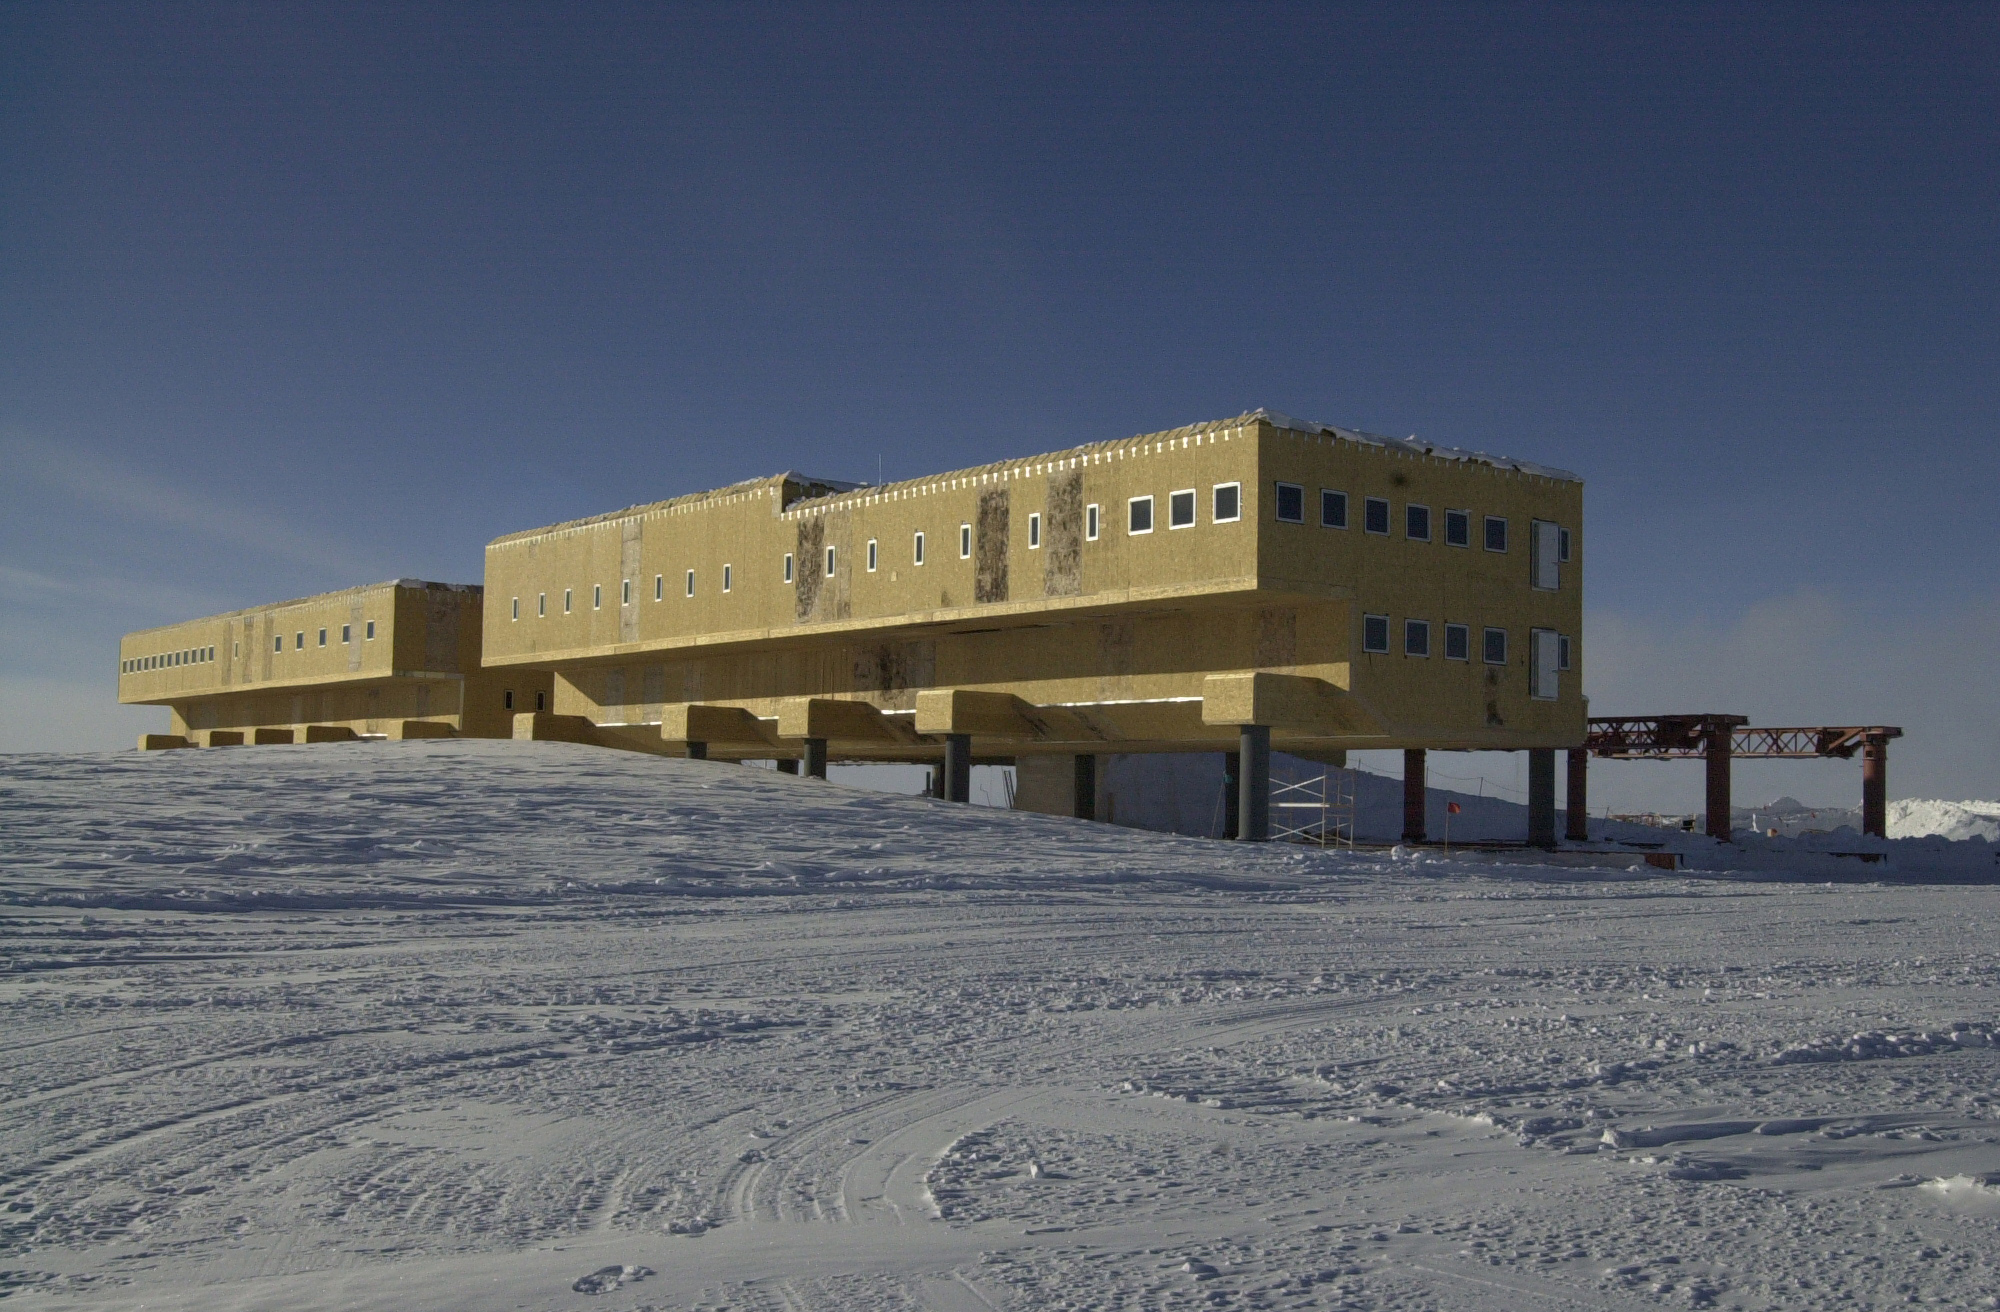 A rectangular building with stilts on the snow.